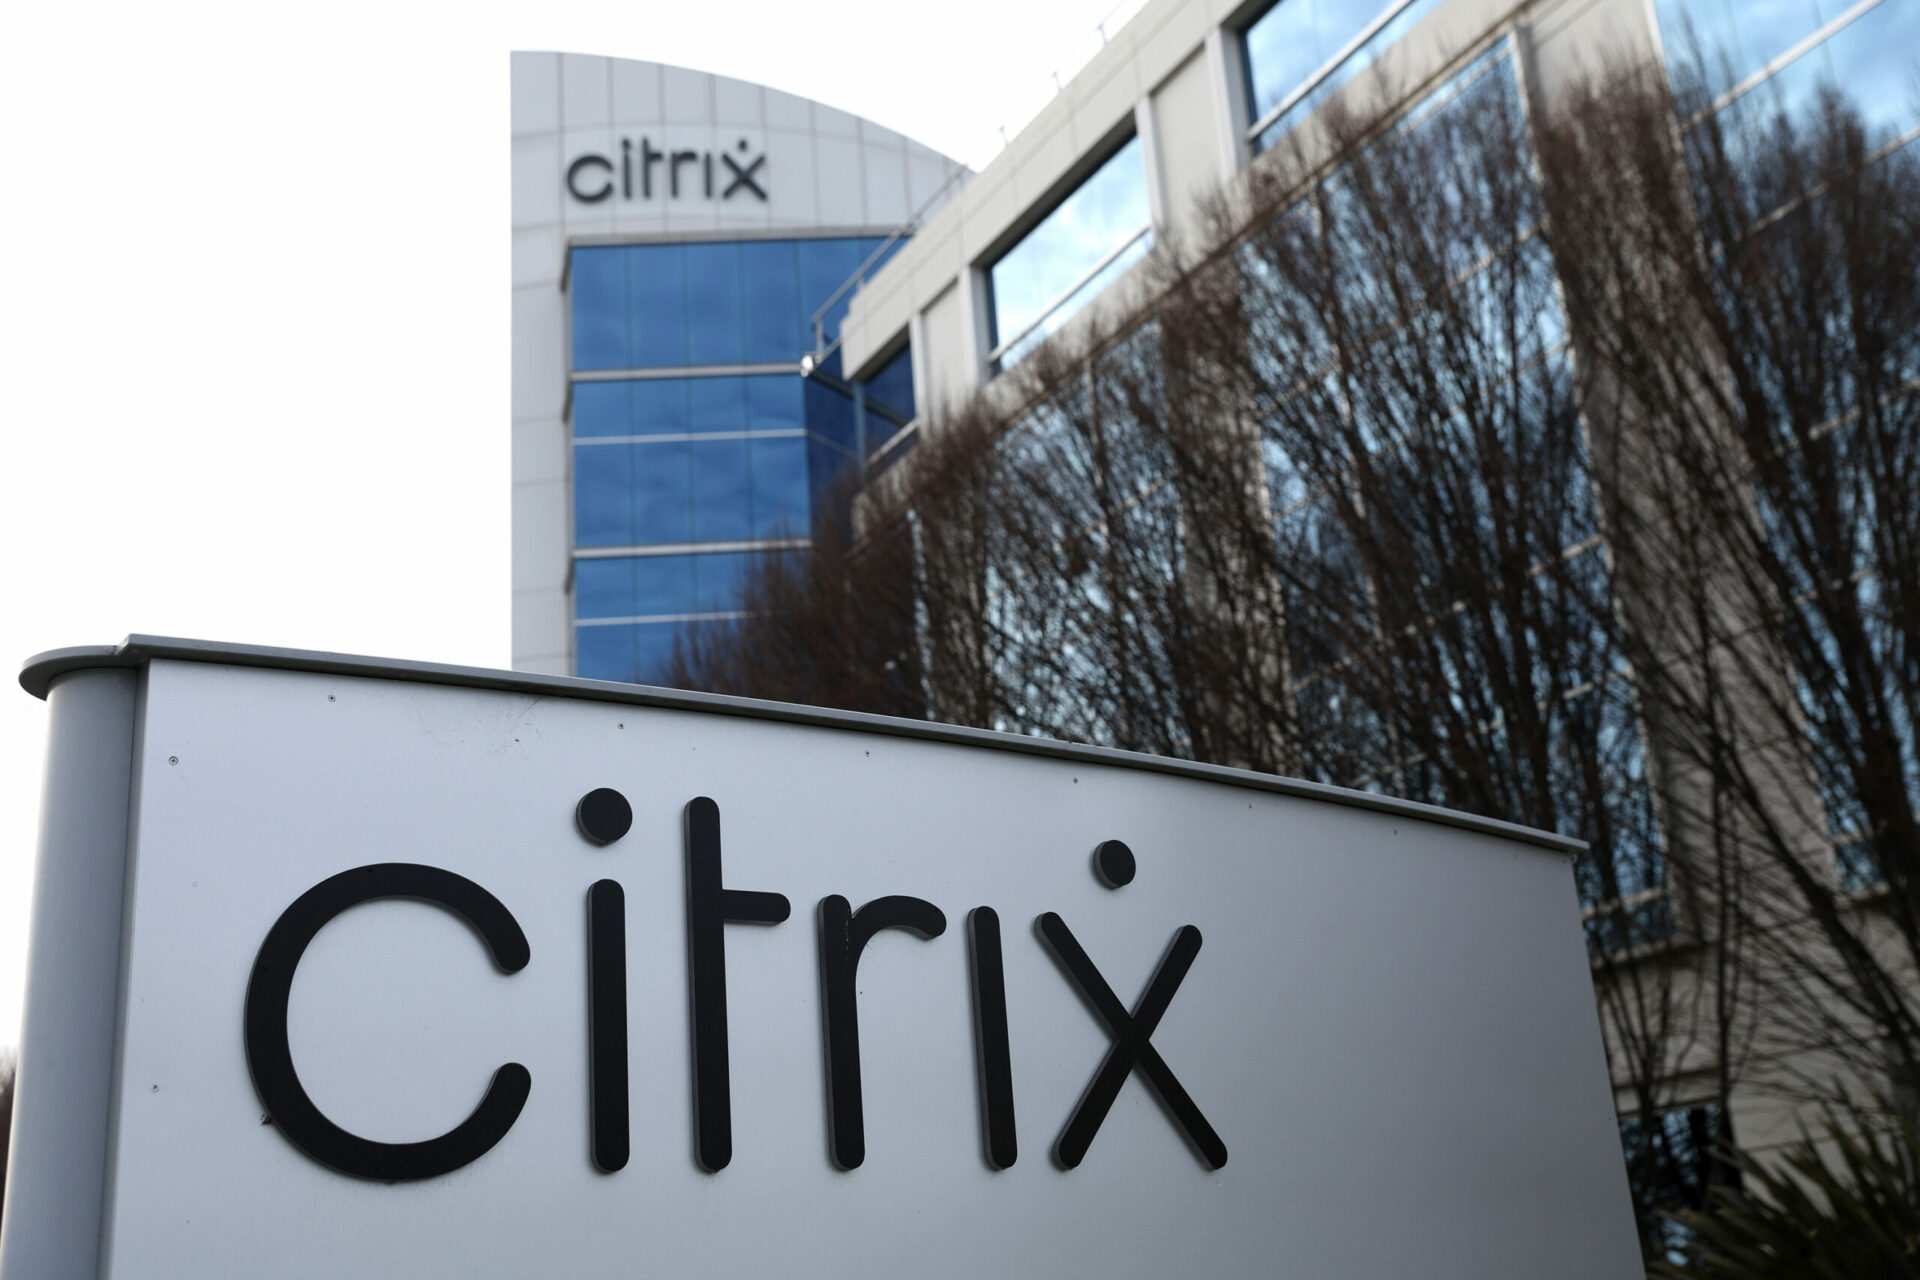 Hackers are exploiting a flaw in Citrix software despite fix